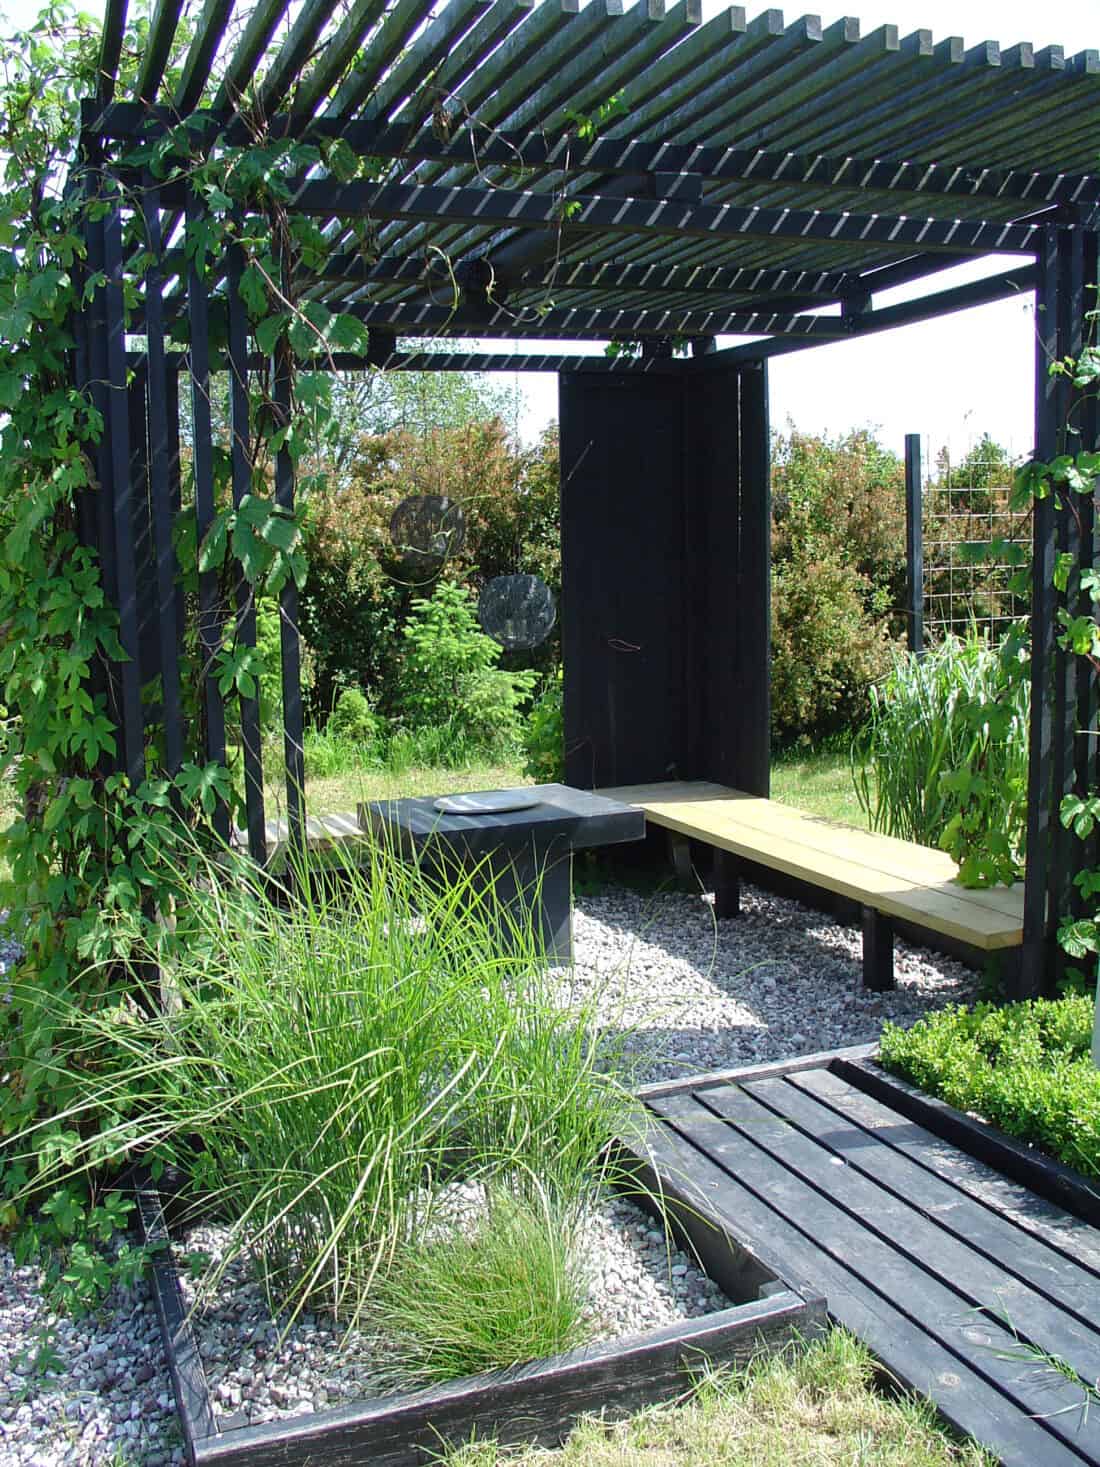 black wood finishes are typical in a garden in the Netherlands